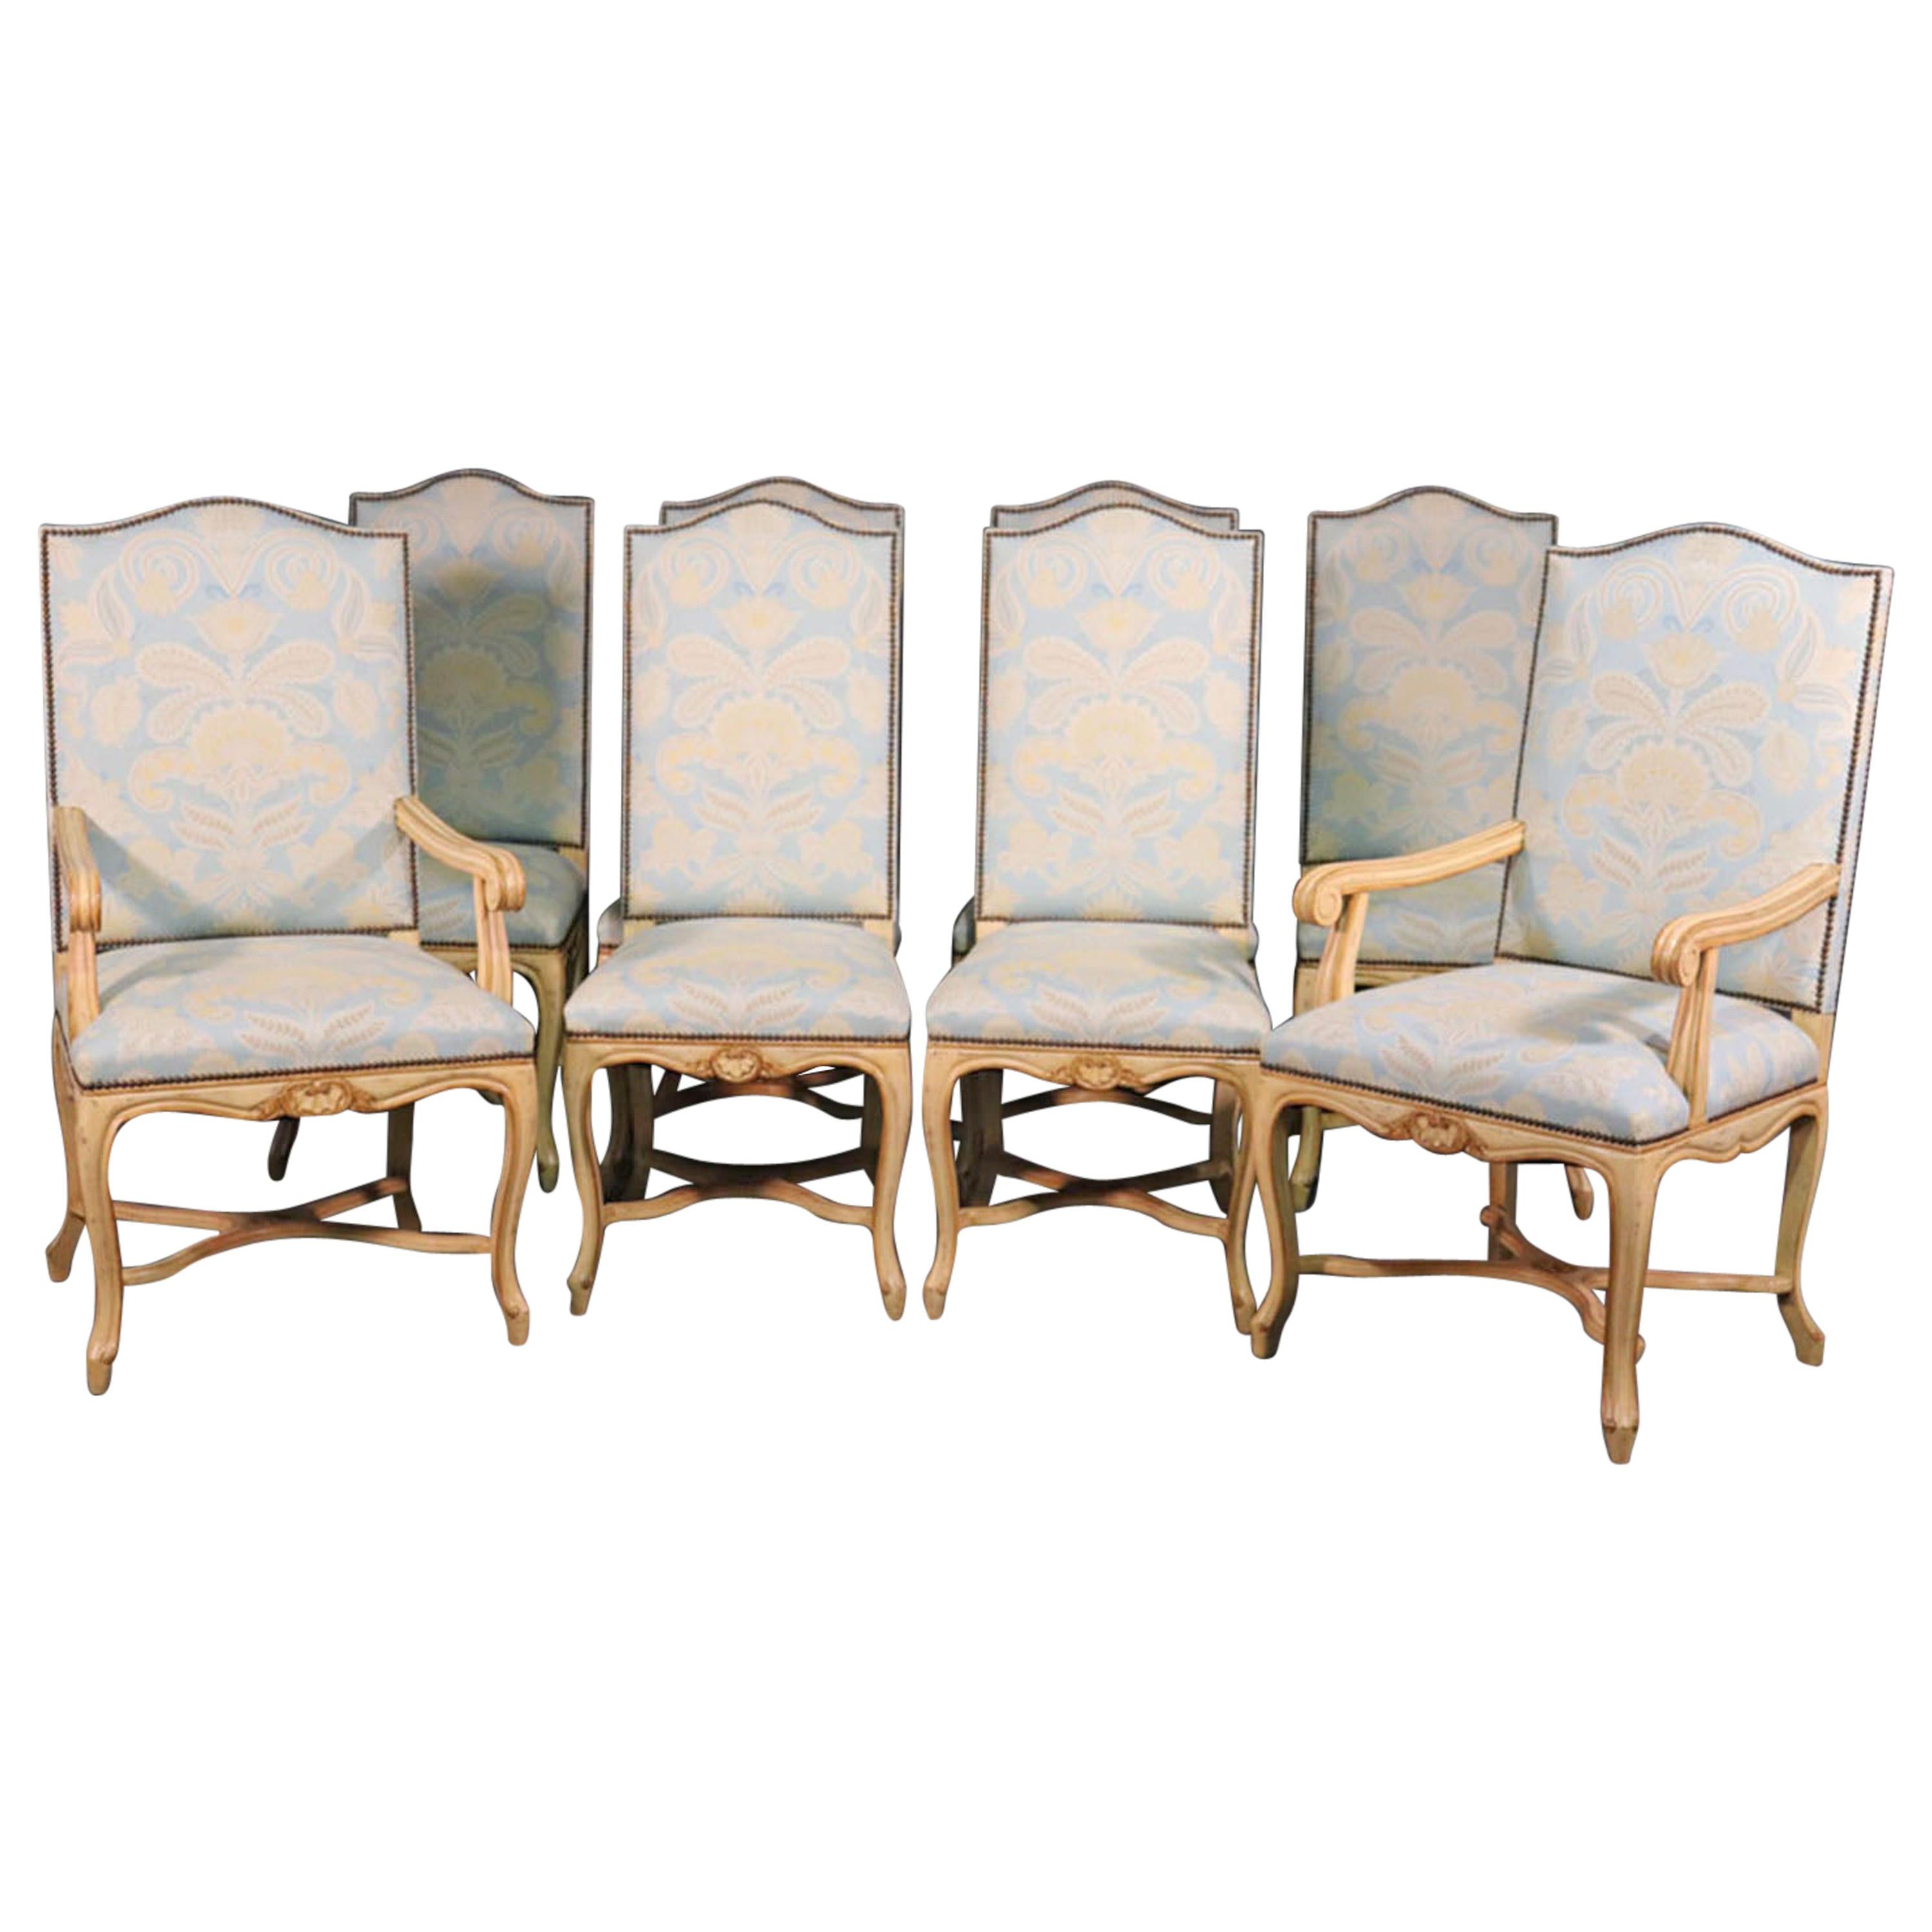 Set of 8 Maison Jansen Crème Paint and Gold Gilded French Louis XV Dining Chairs